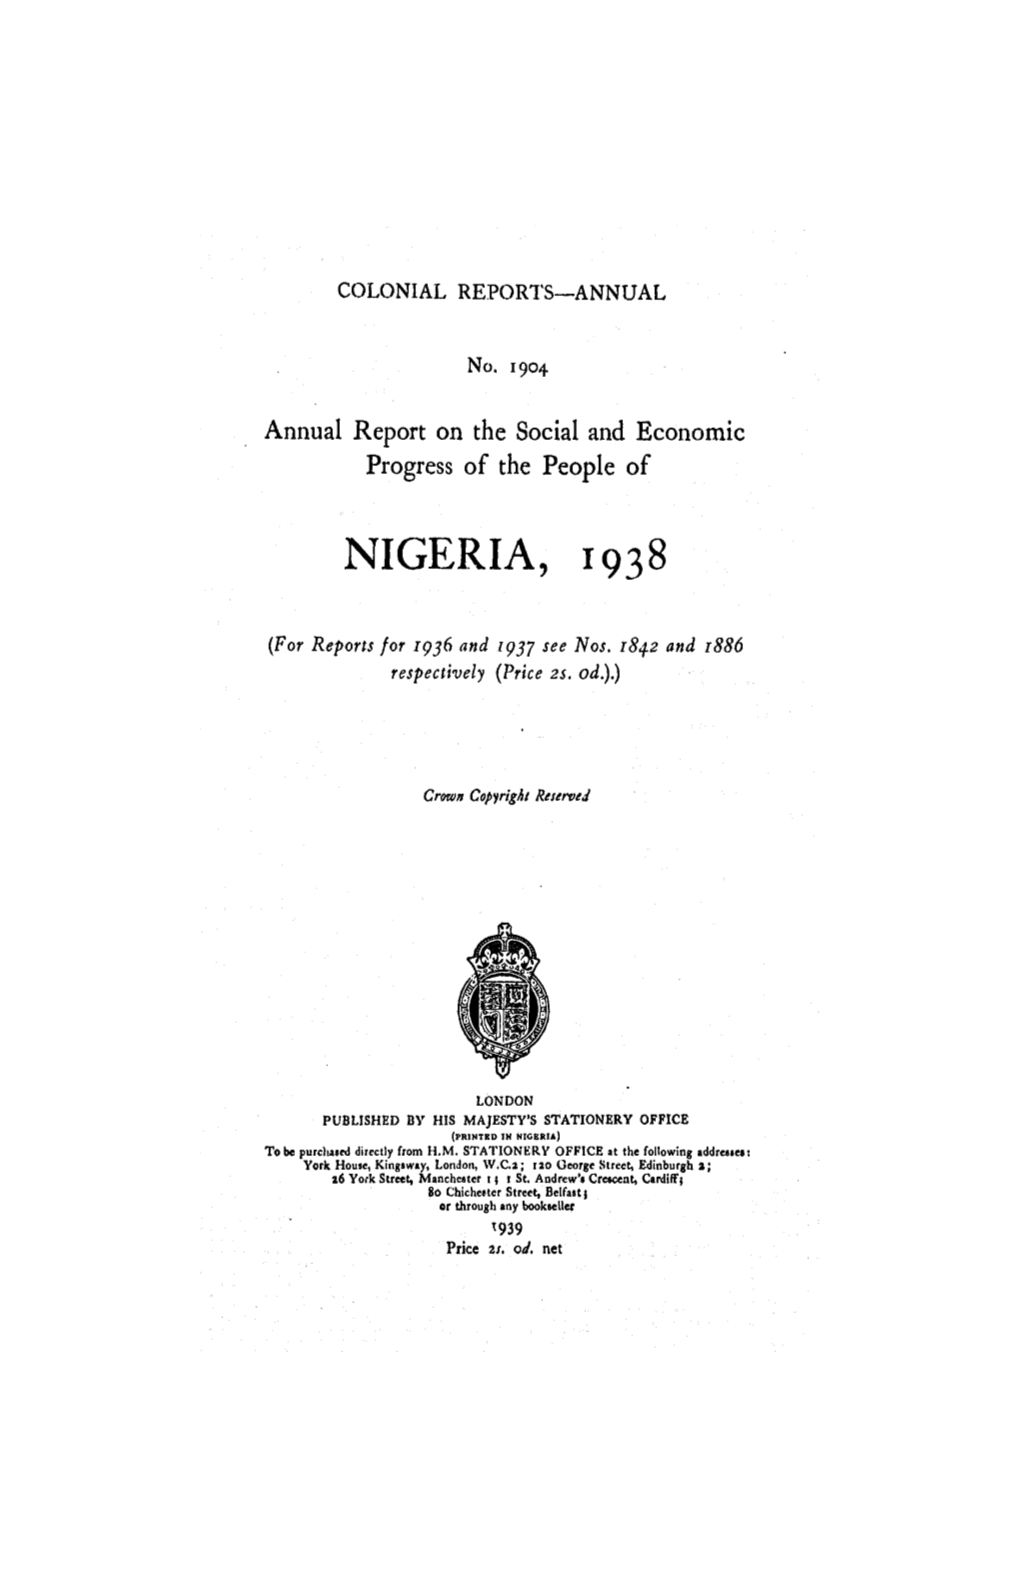 Annual Report of the Colonies, Nigeria, 1938